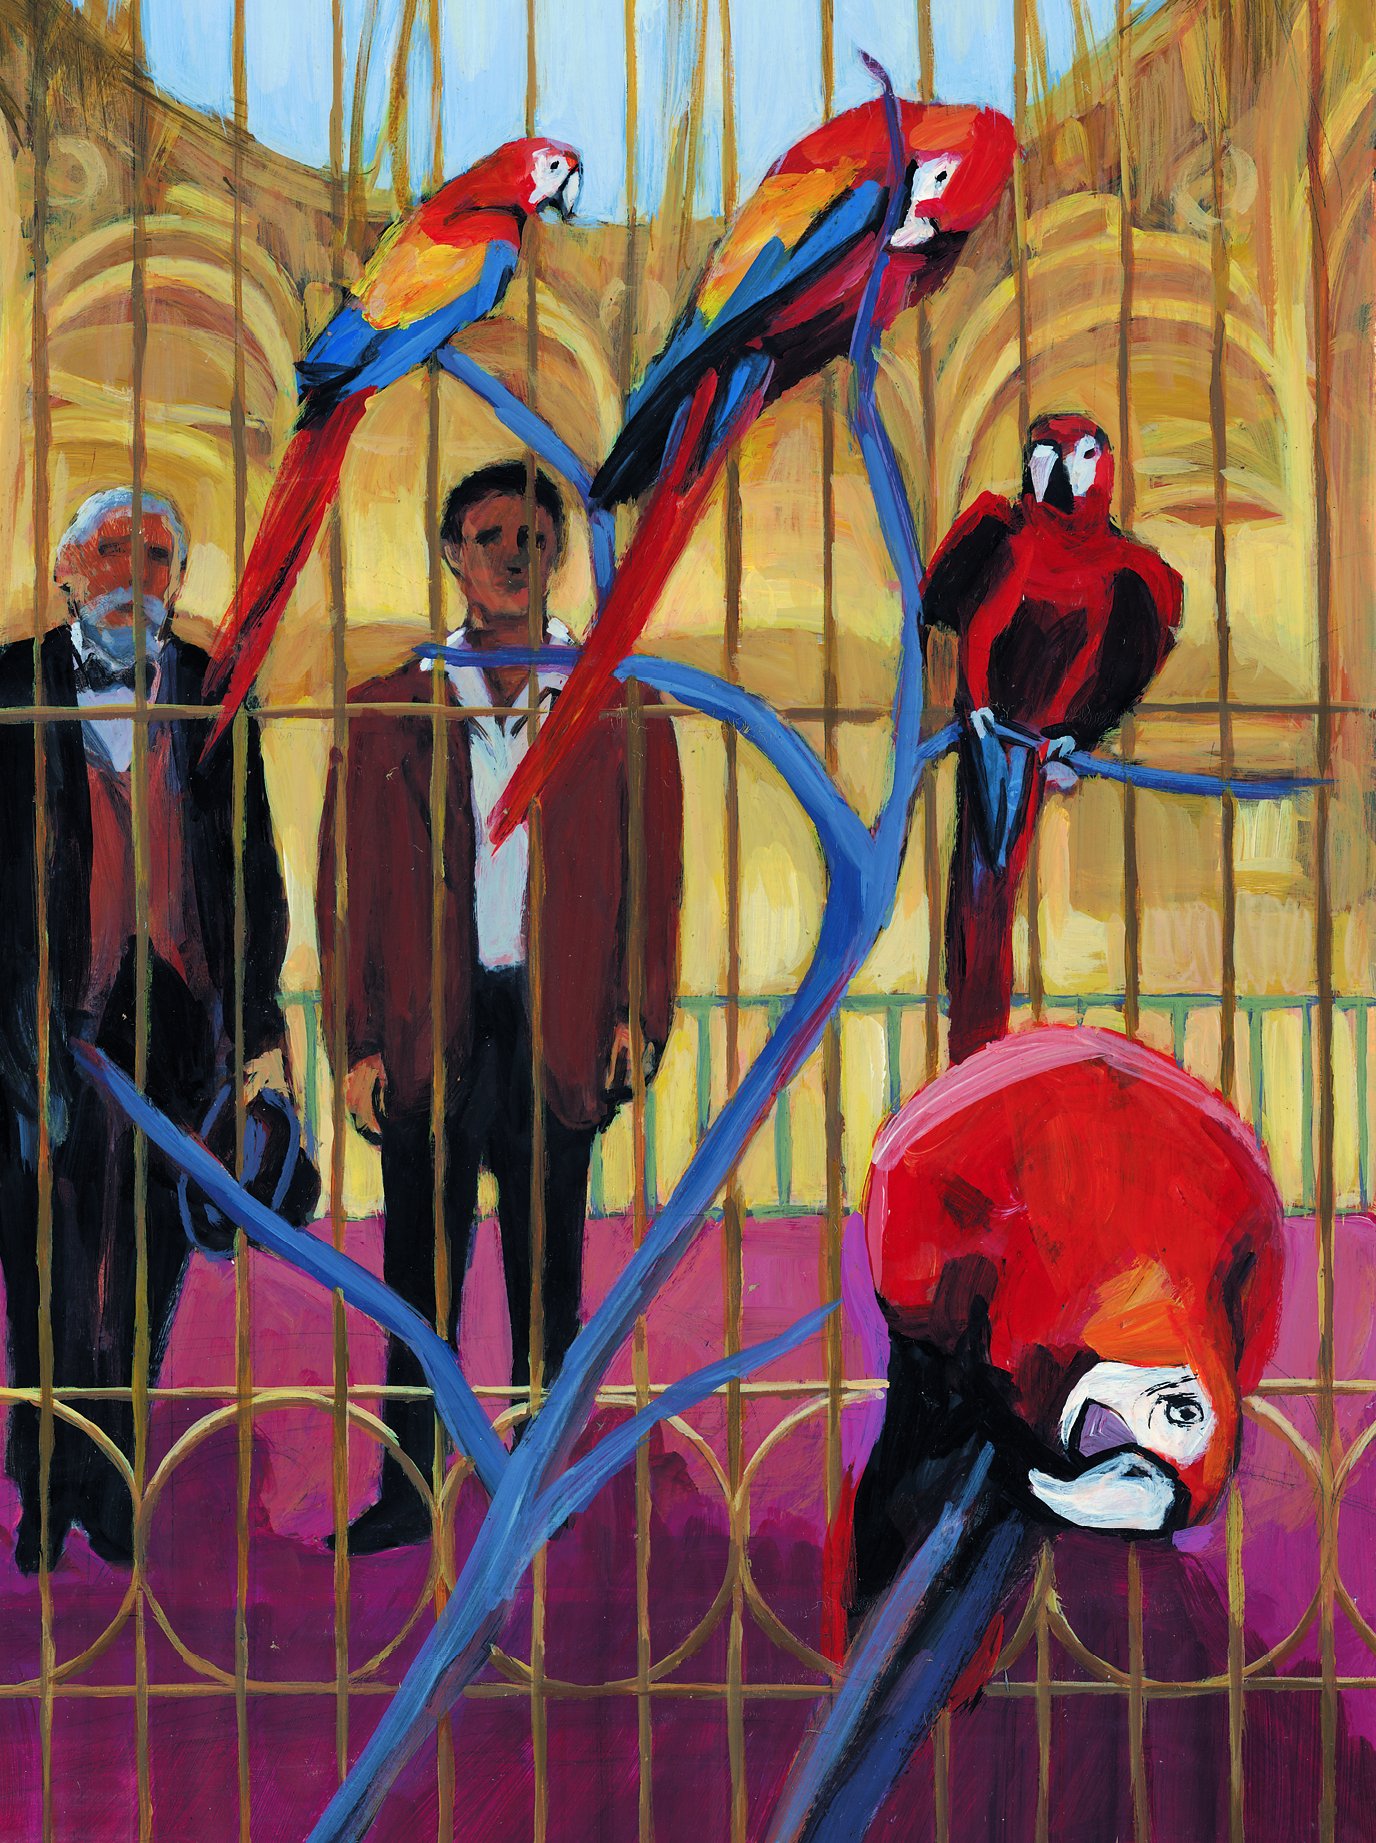 Oil painting showing two men watching brightly colored parrots perched in a large cage